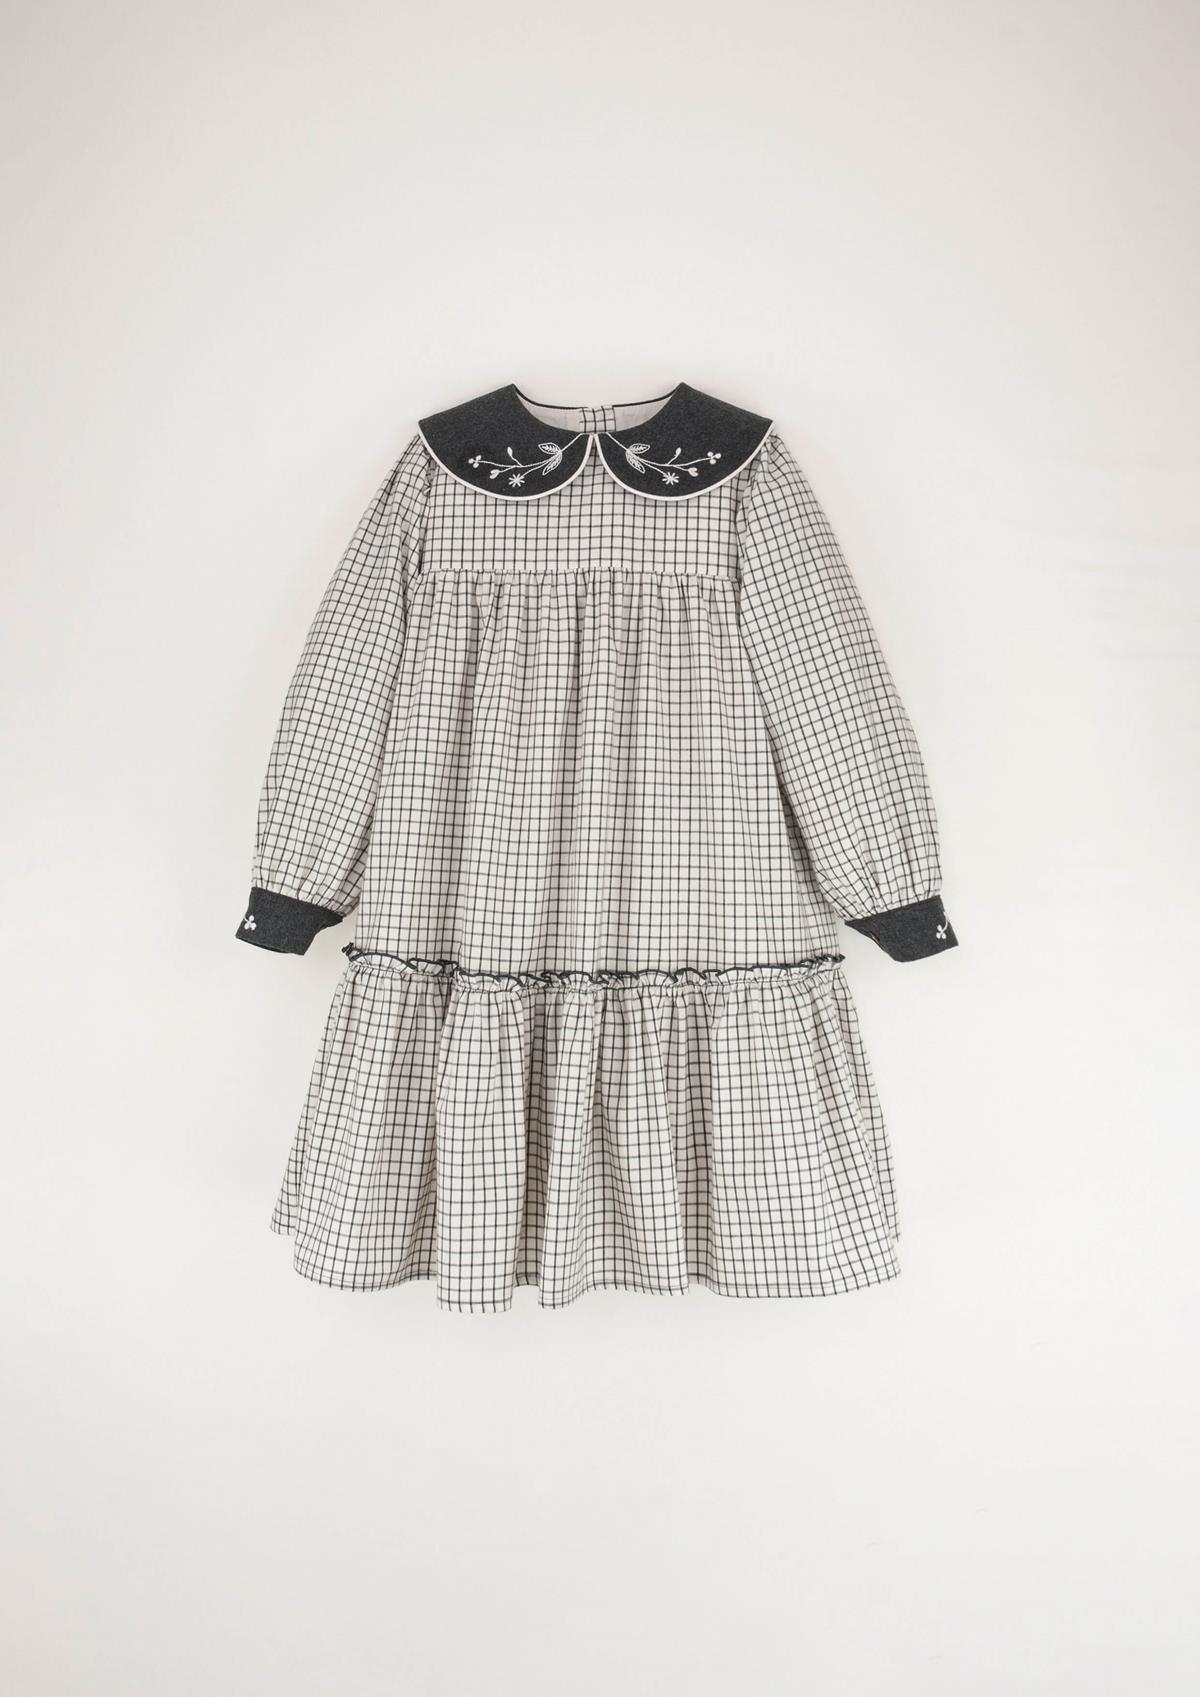 Mod.33.3 Off-white check dress with embroidered collar | AW23.24 Mod.33.3 Off-white check dress with embroidered collar